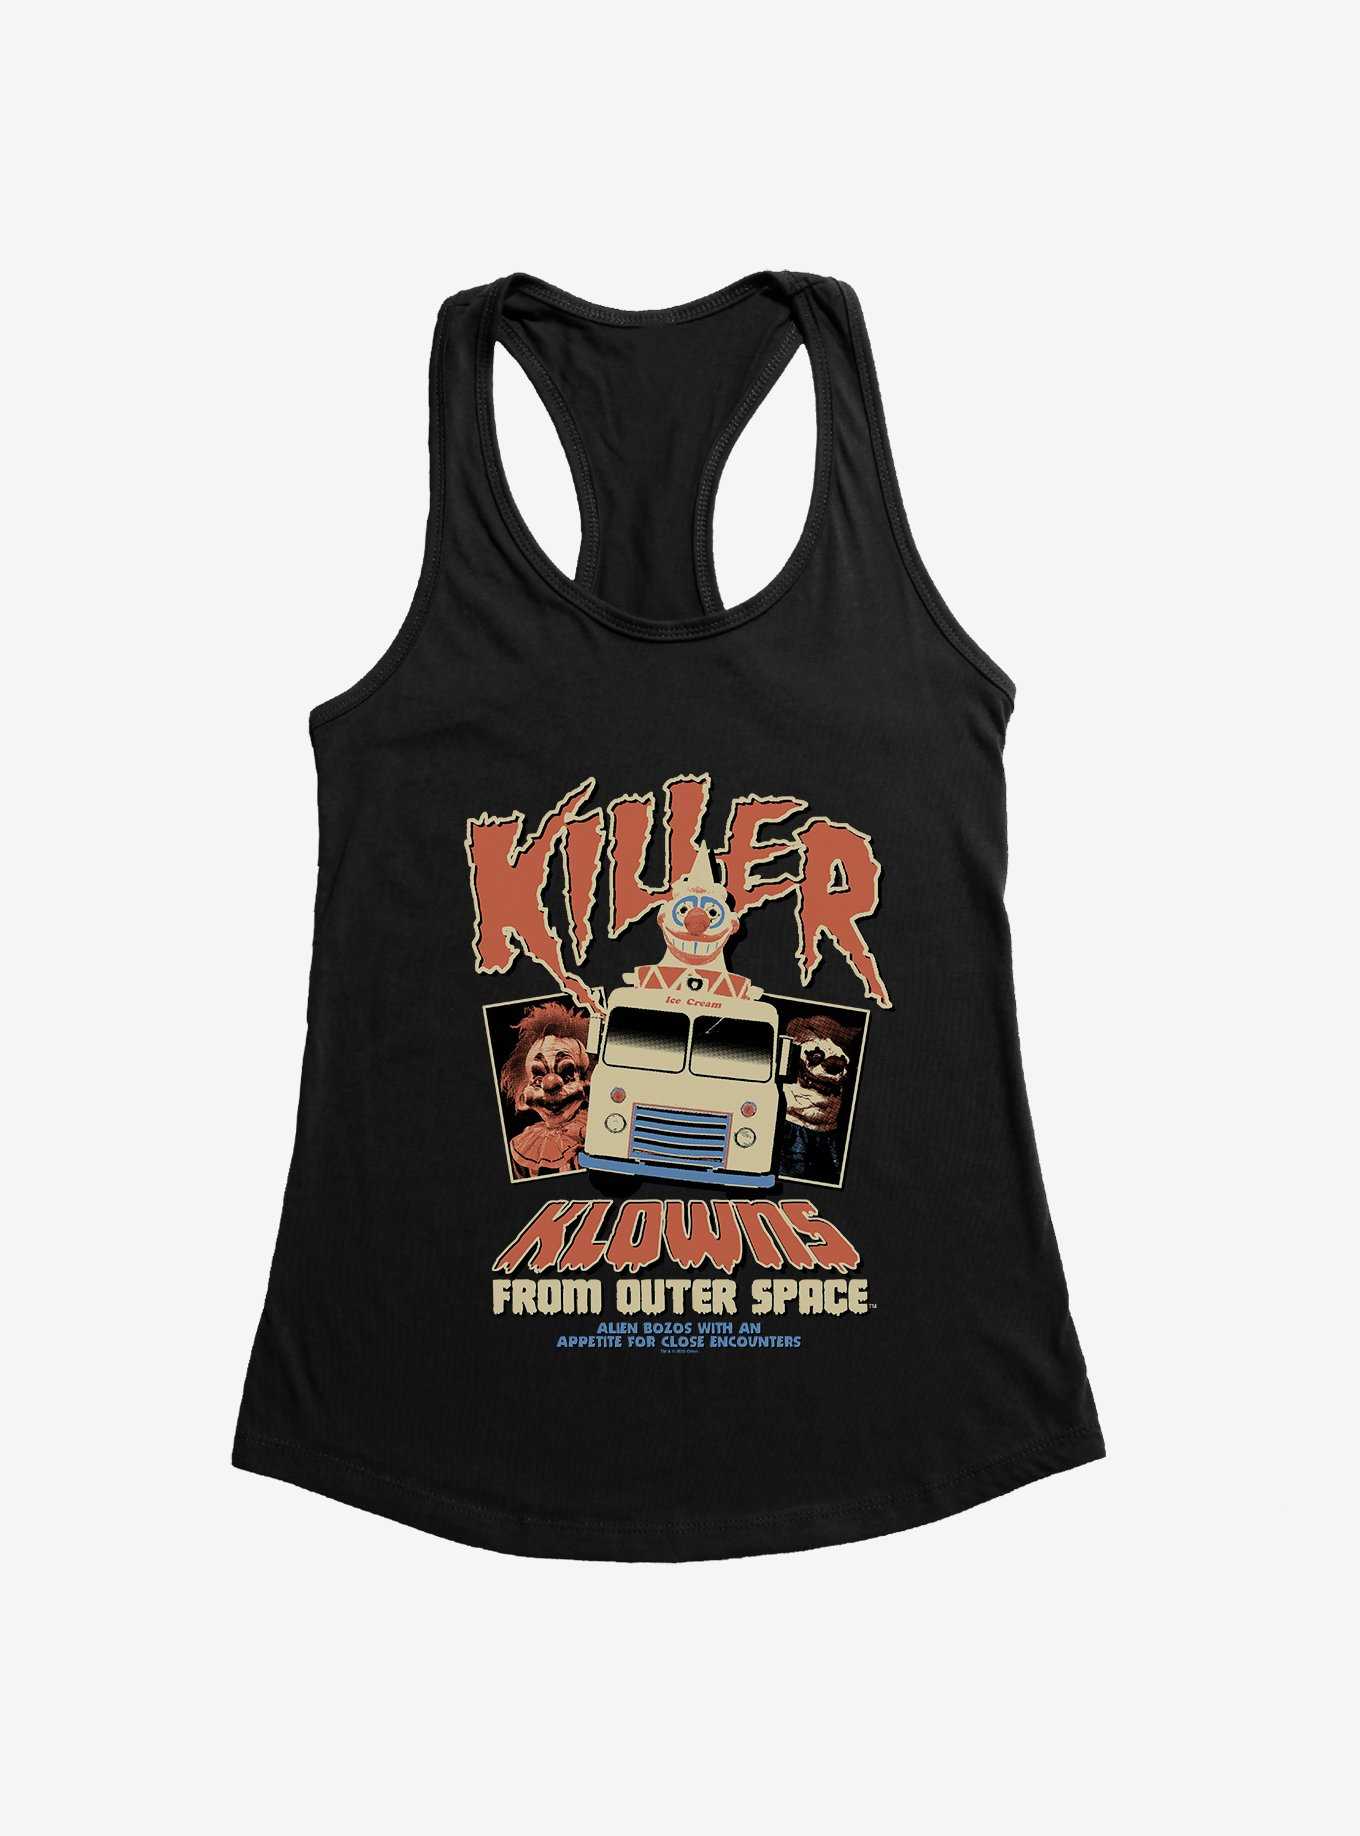 Killer Klowns From Outer Space Vintage Movie Poster Girls Tank, , hi-res